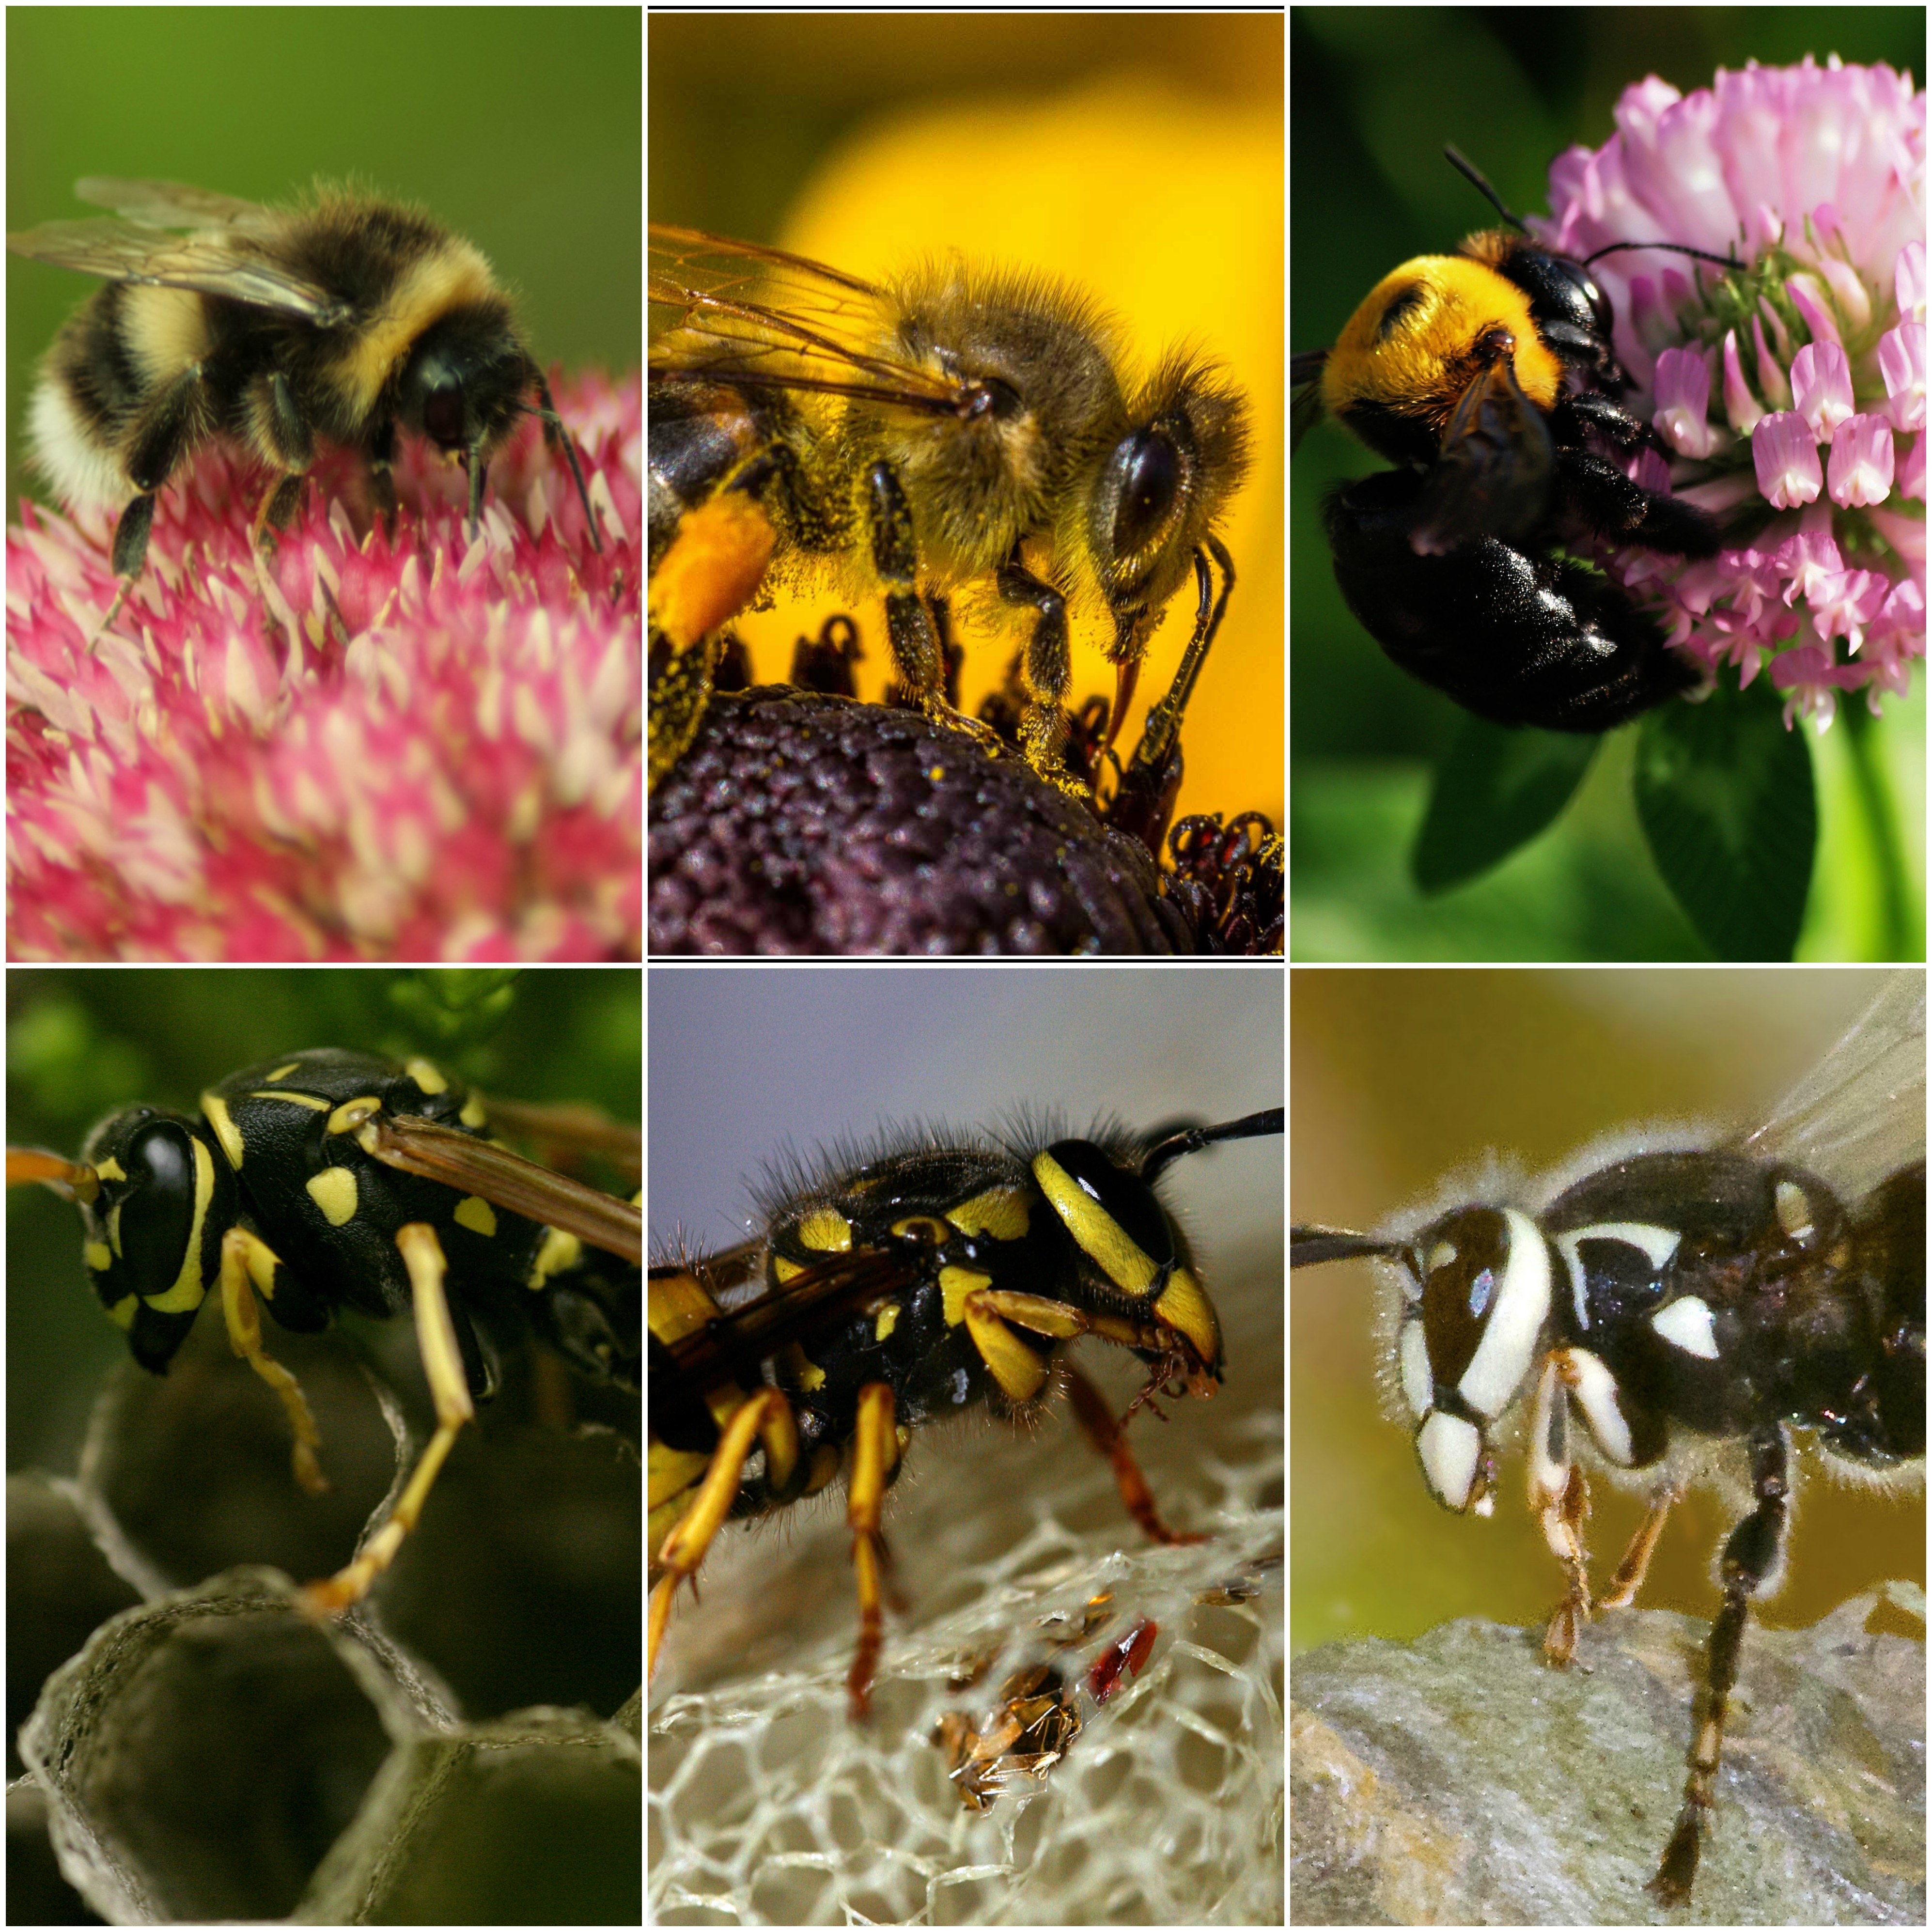 Know Your Stinging Insects: Bees, Wasps, and Hornets! Oh, My! - ABC ...